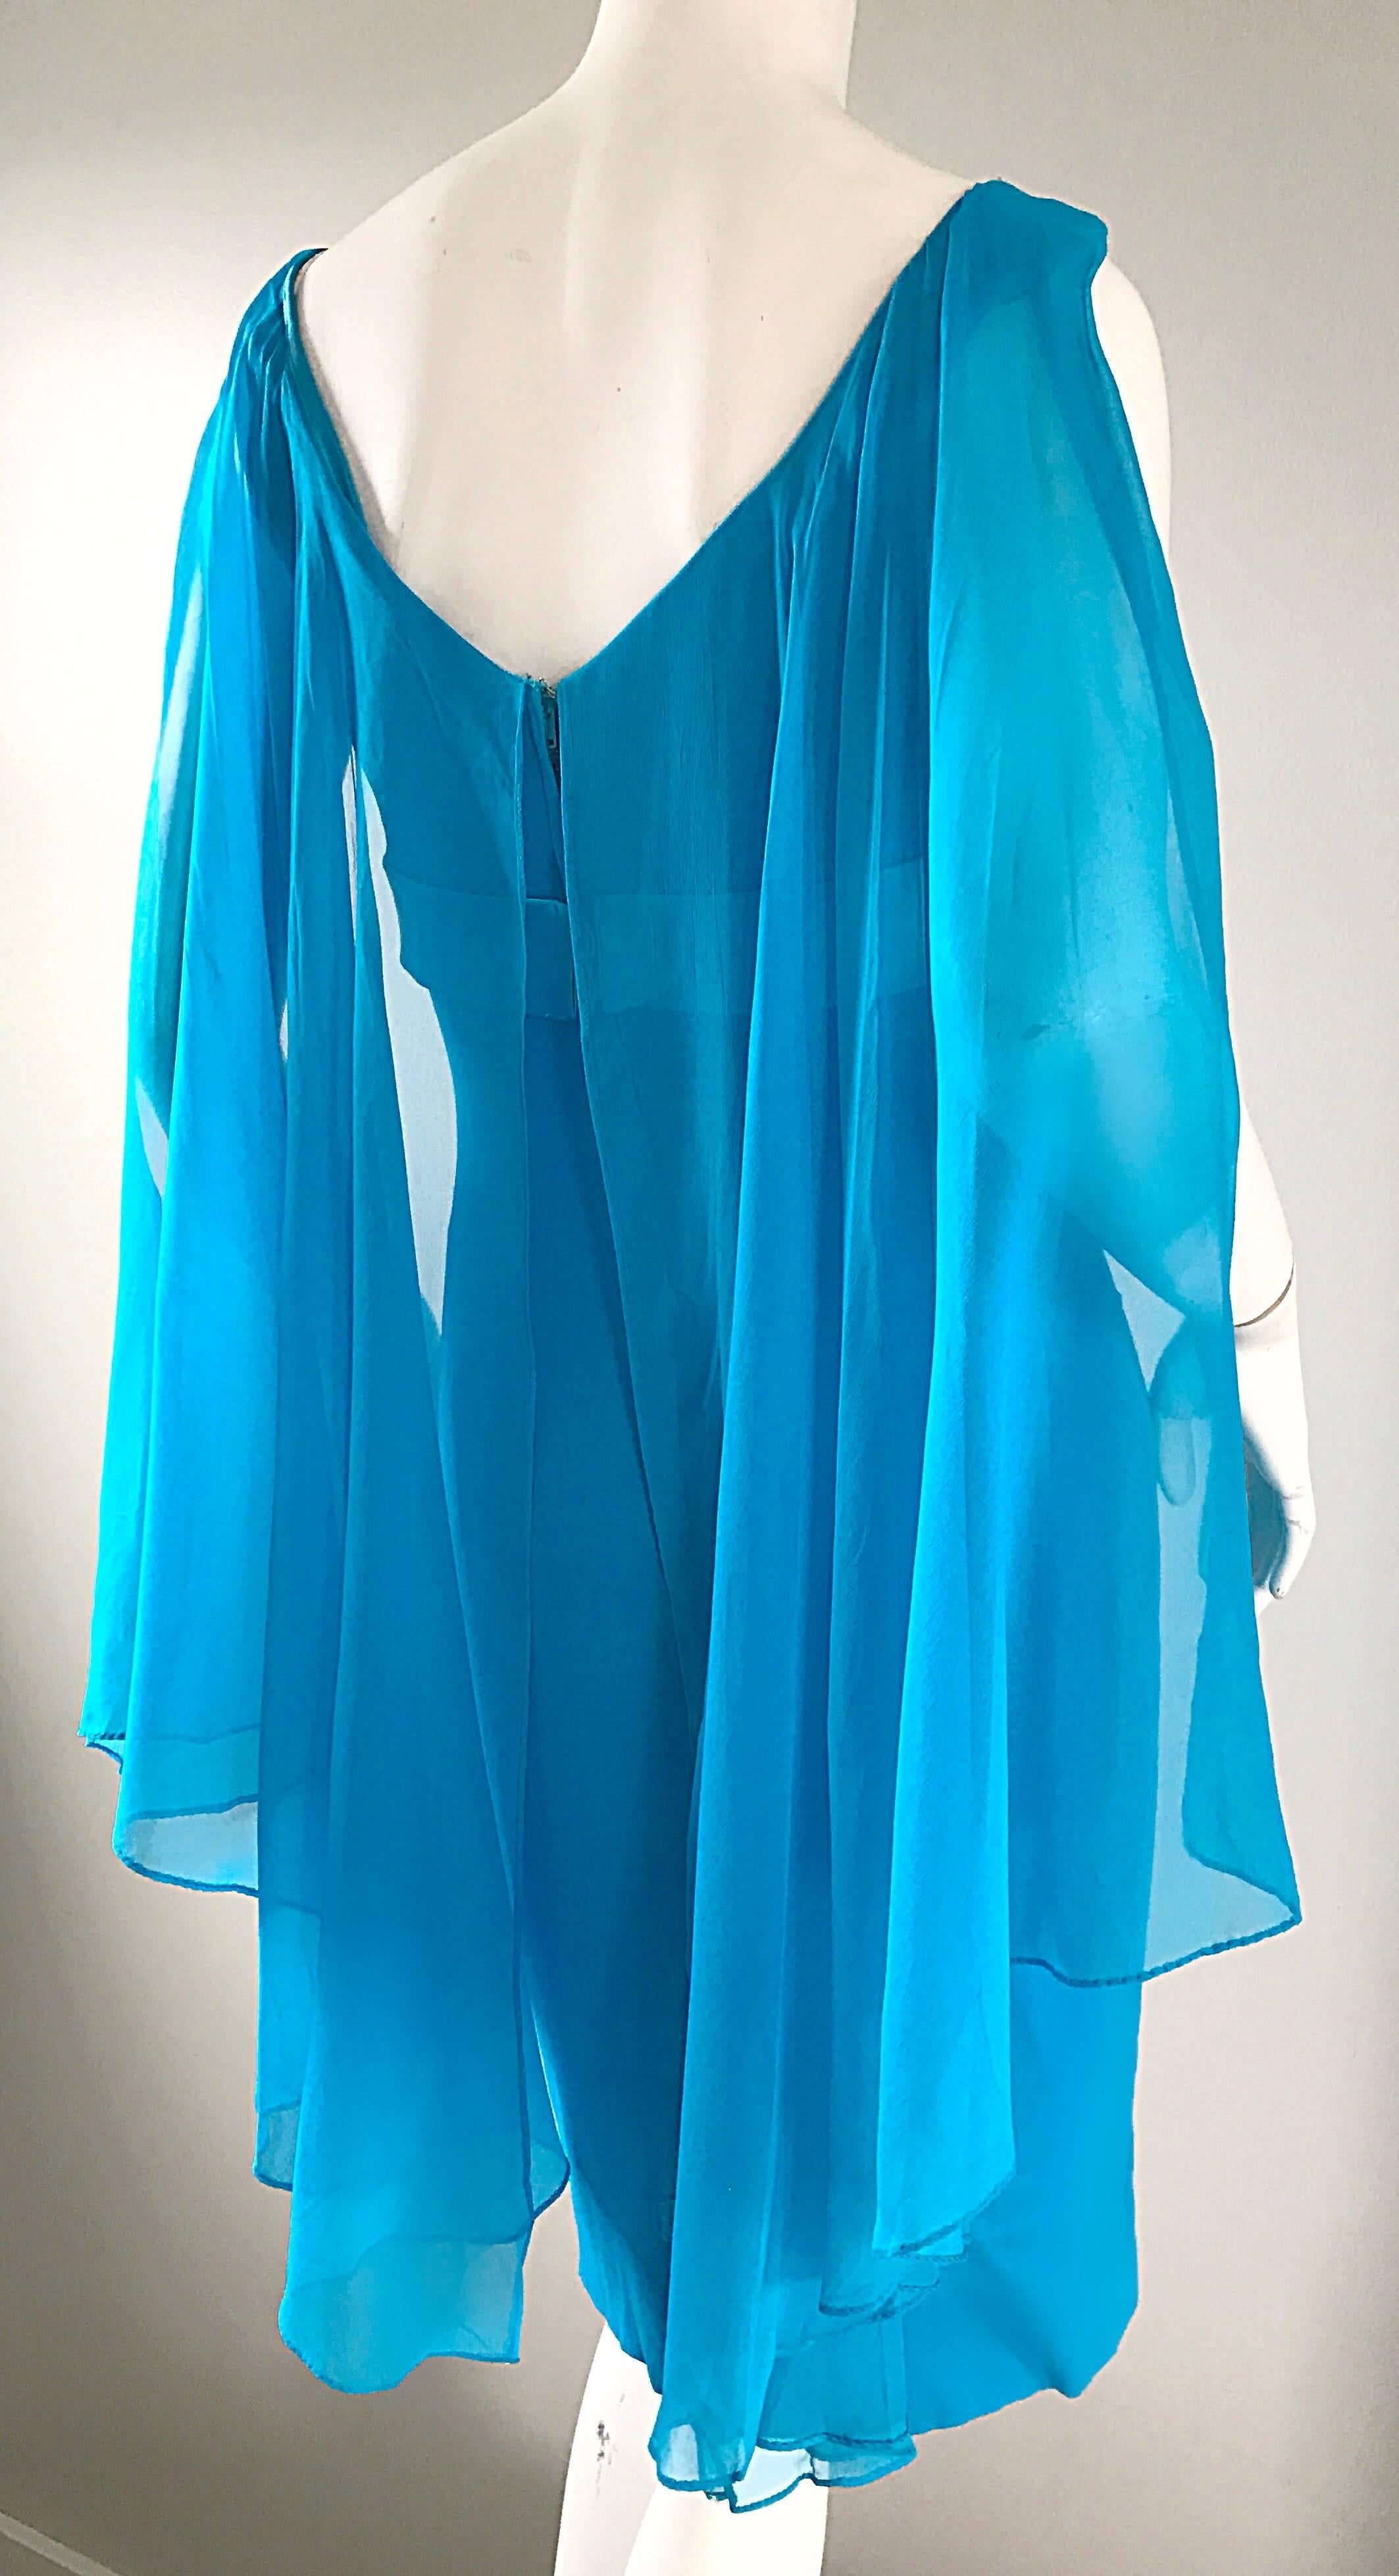 Amazing 1960s Turquoise Blue Chiffon Vintage Wiggle 60s Dress w/ Attached Cape In Excellent Condition For Sale In San Diego, CA